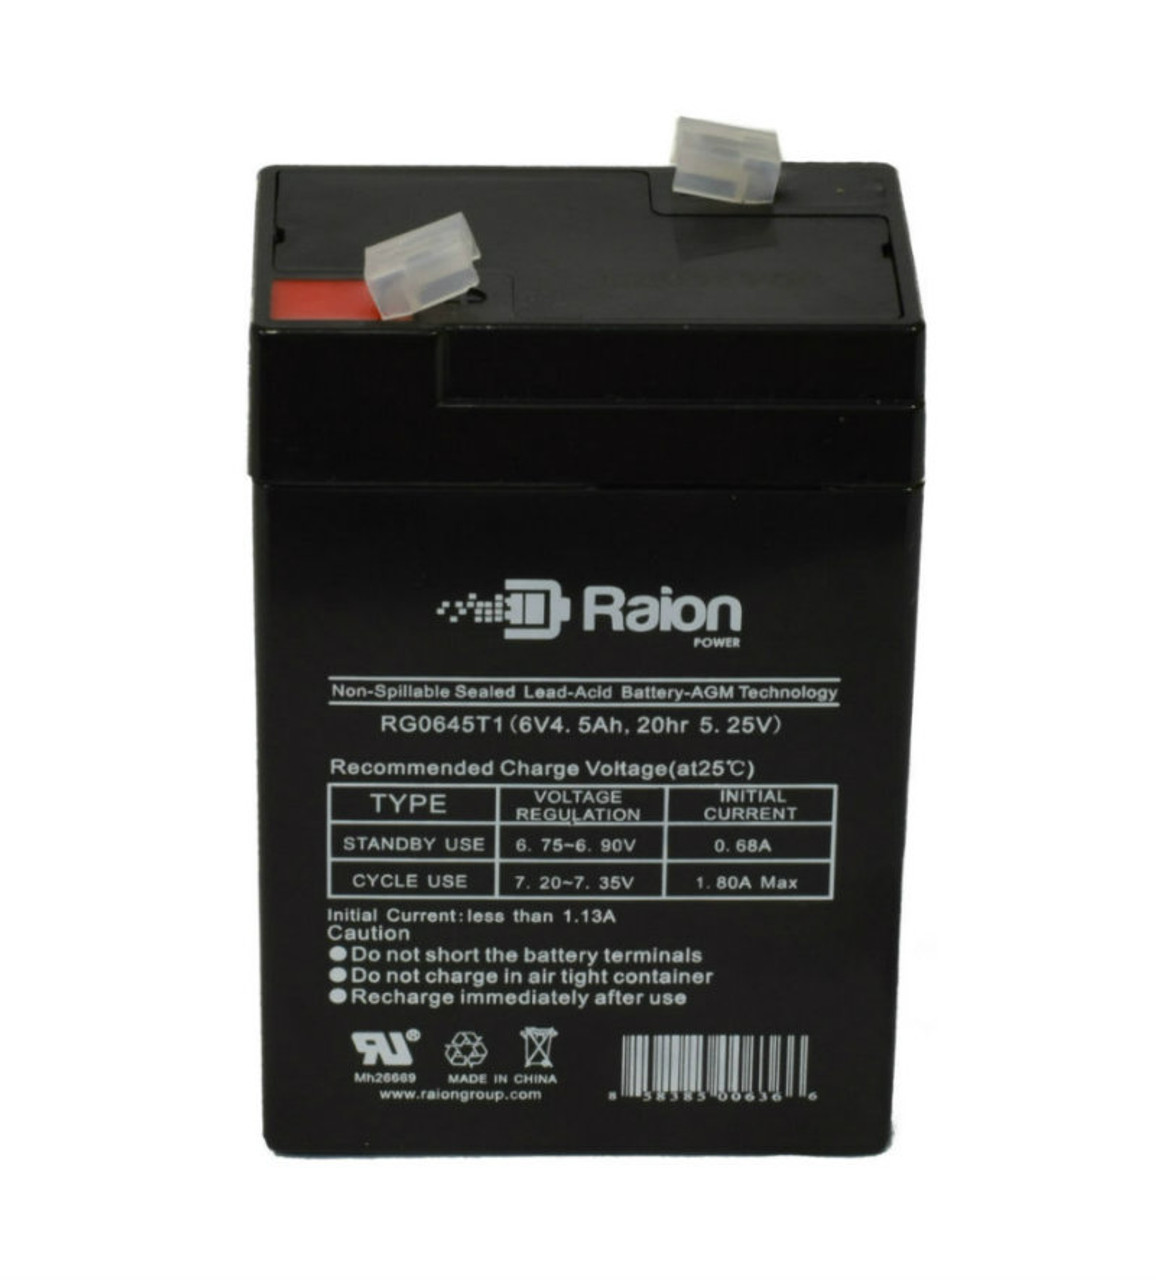 Raion Power RG0645T1 Replacement Battery Cartridge for High-Lites 39-01